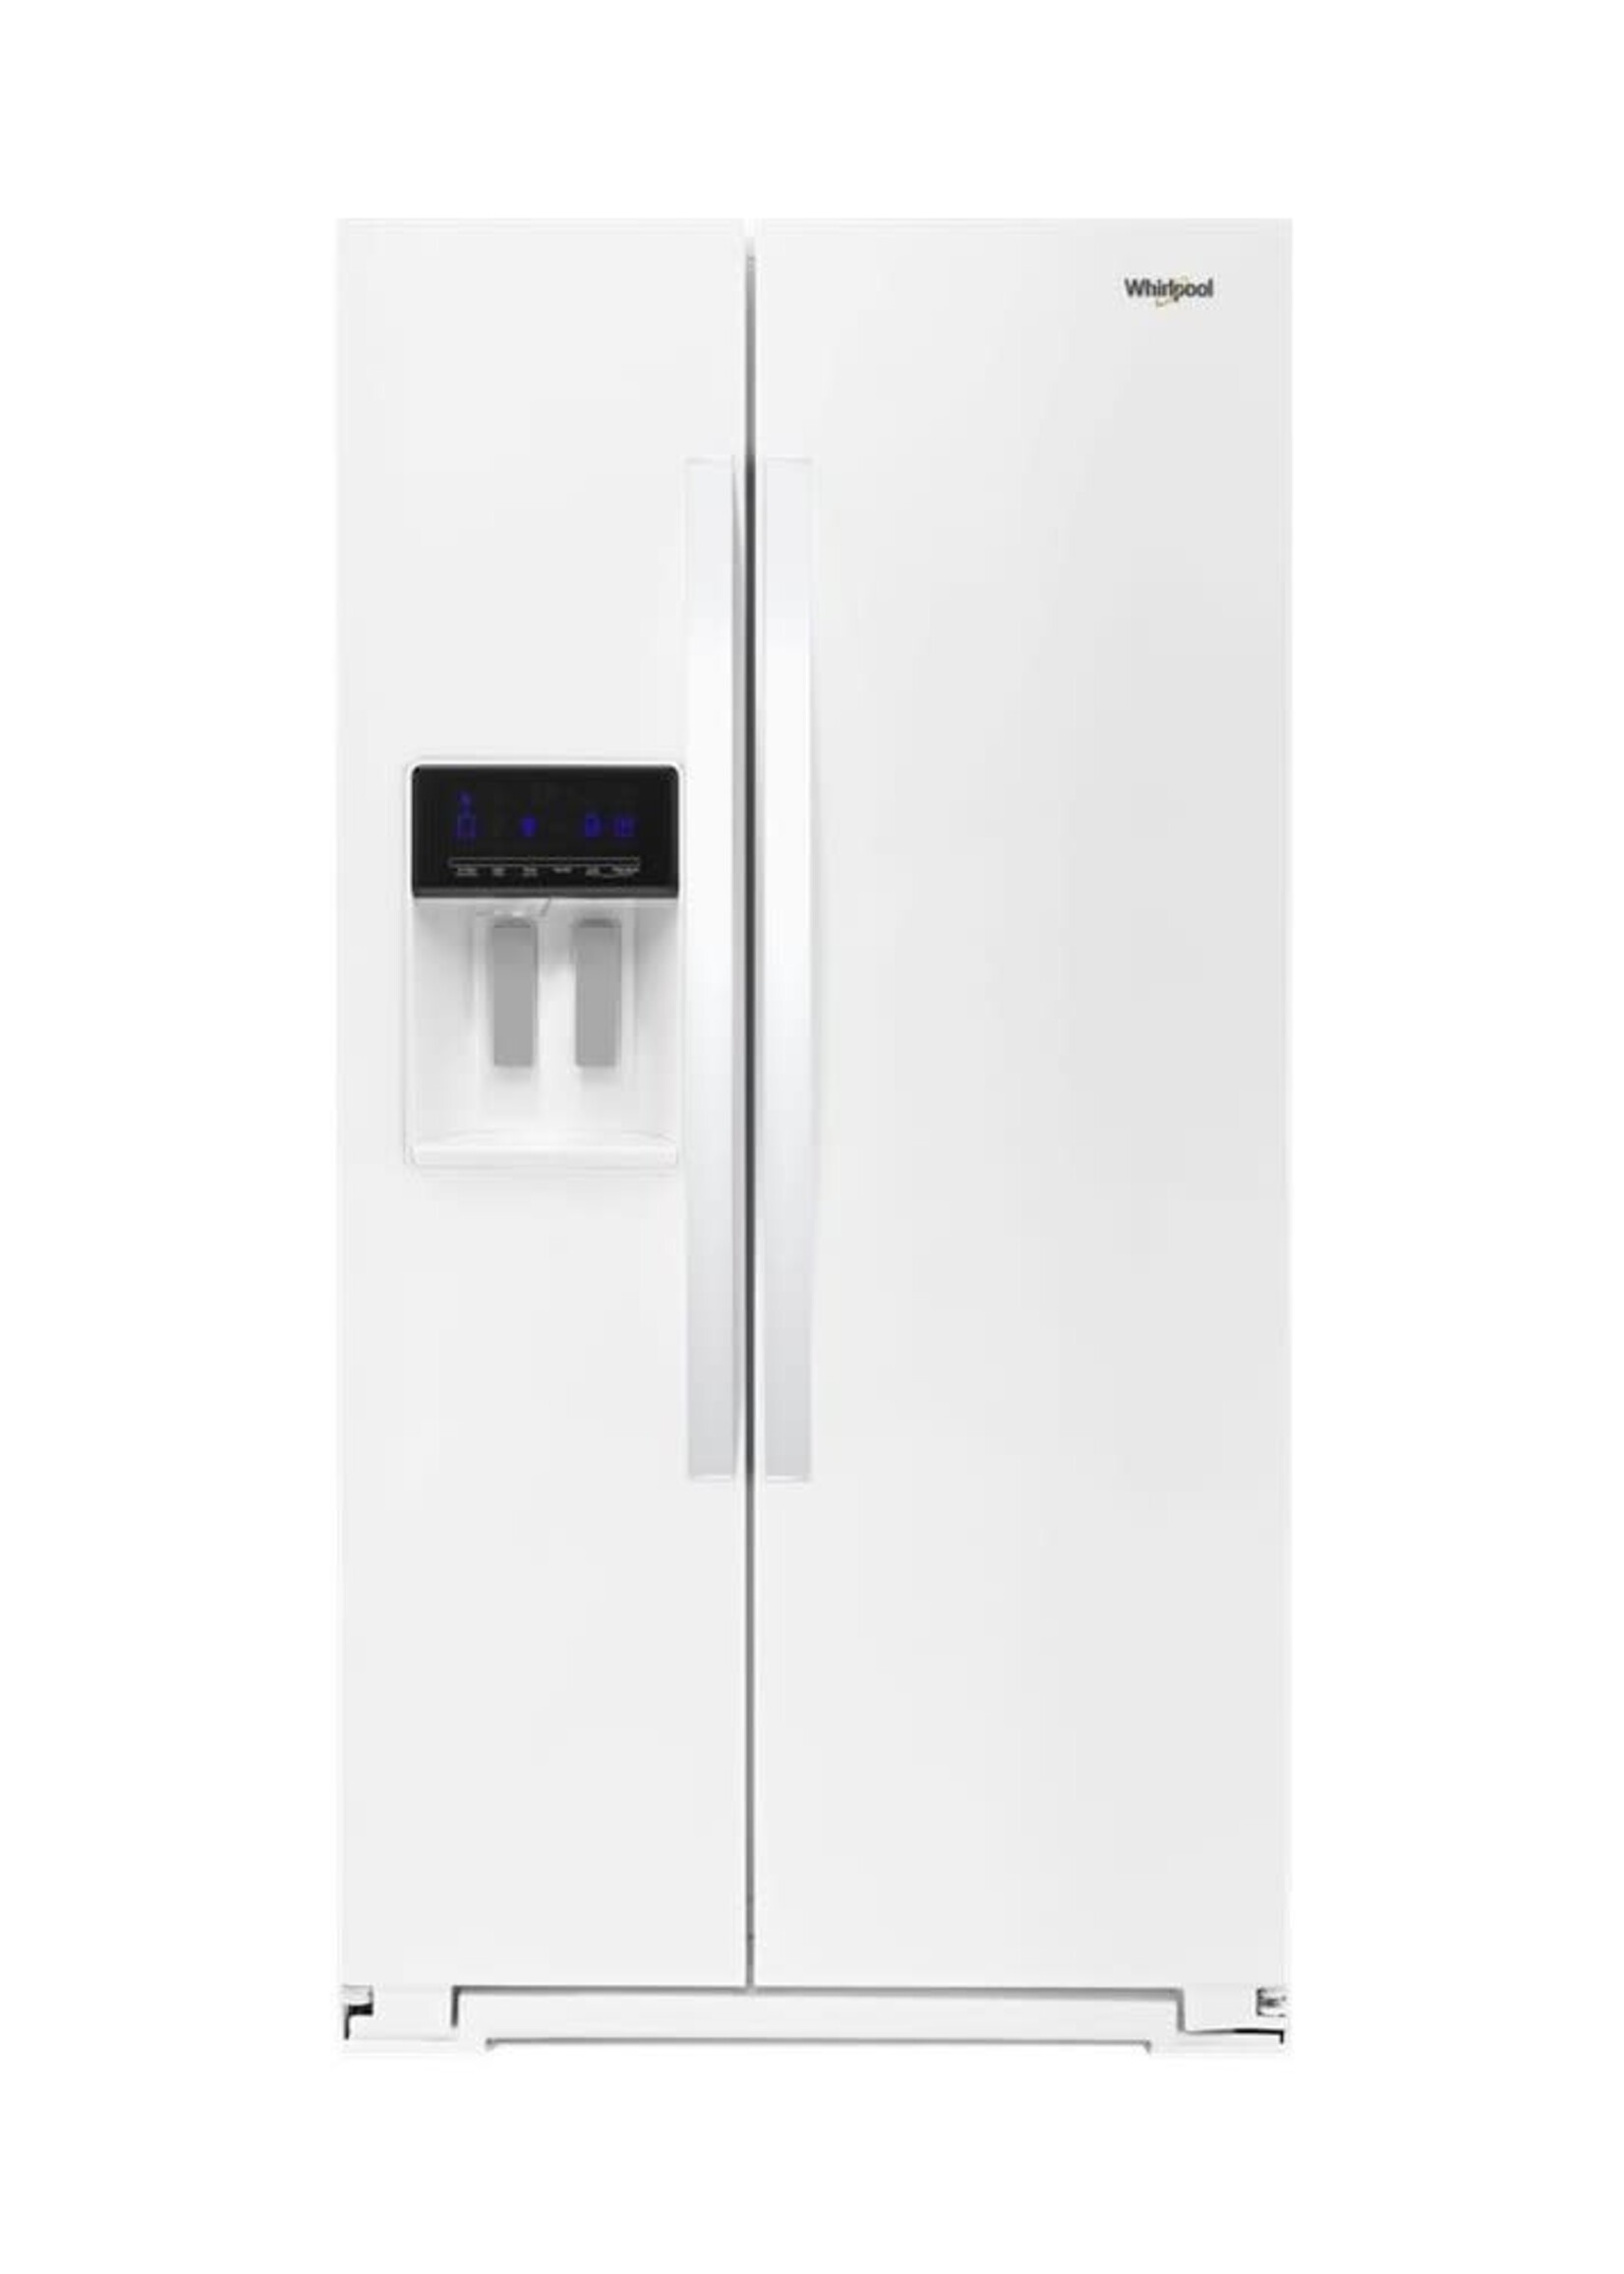 Whirlpool *Whirlpool WRS588FIHW 28.4-cu ft Side-by-Side Refrigerator with Ice Maker (White)